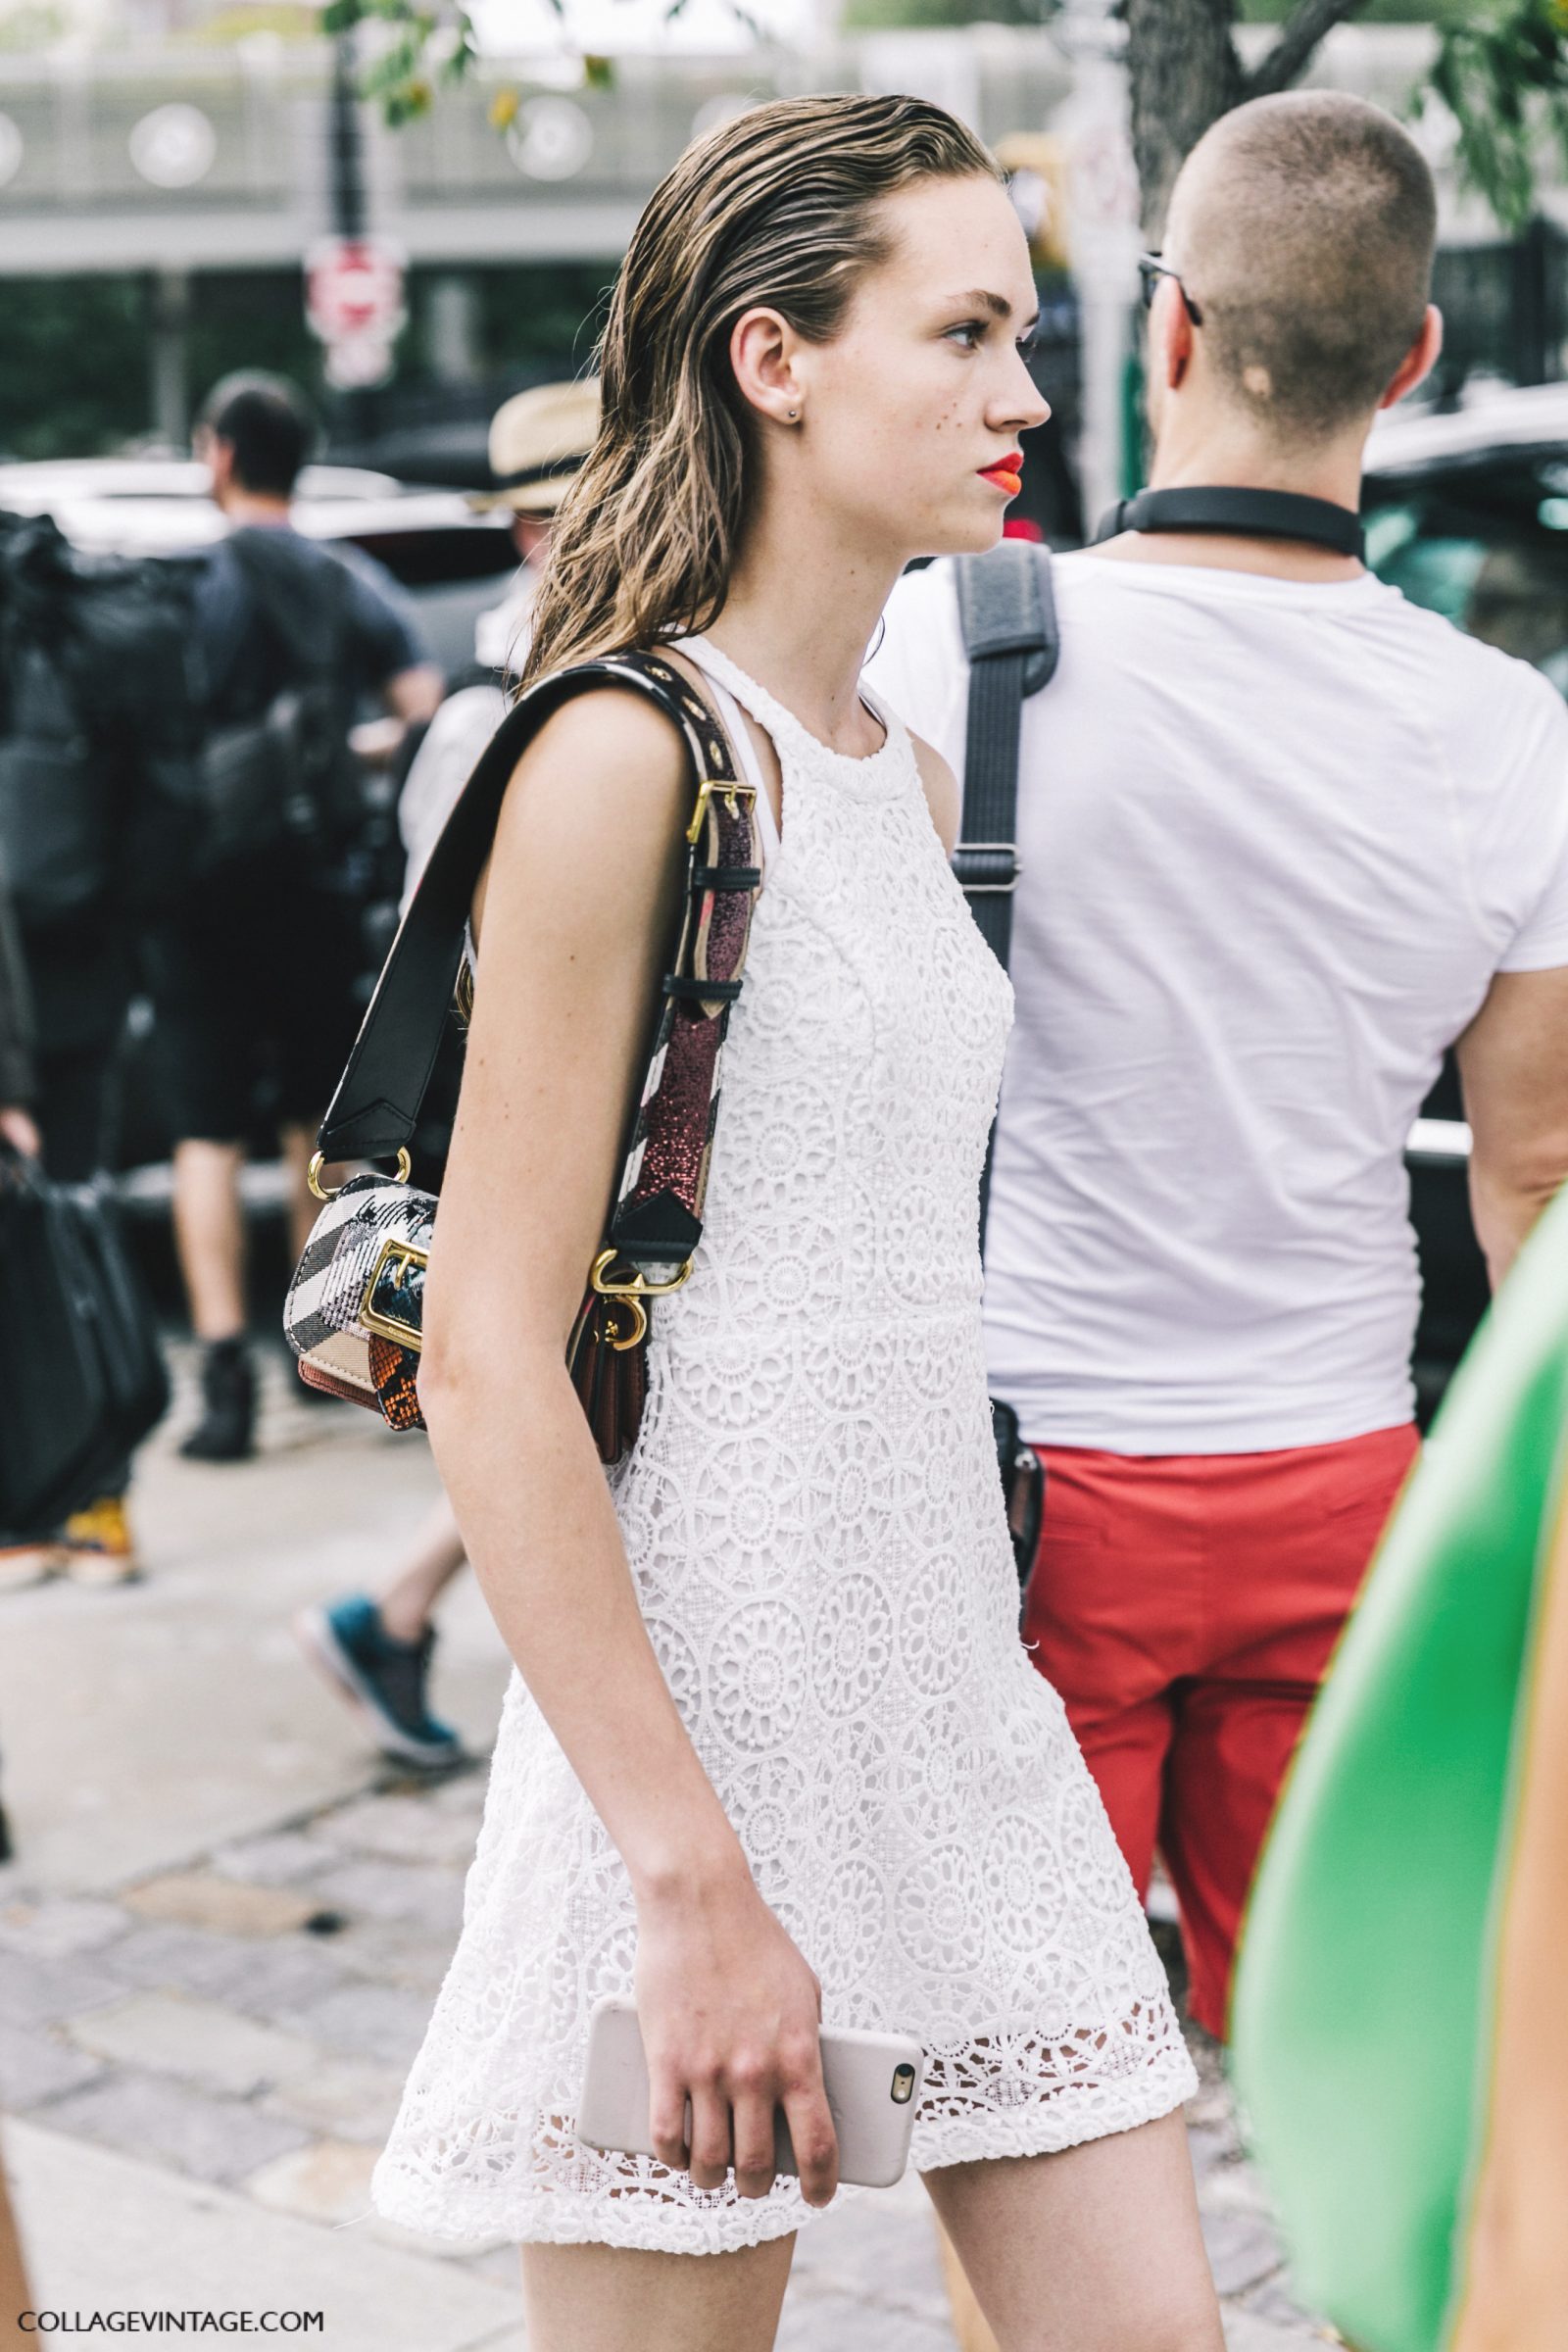 nyfw-new_york_fashion_week_ss17-street_style-outfits-collage_vintage-model-lace_dress-1